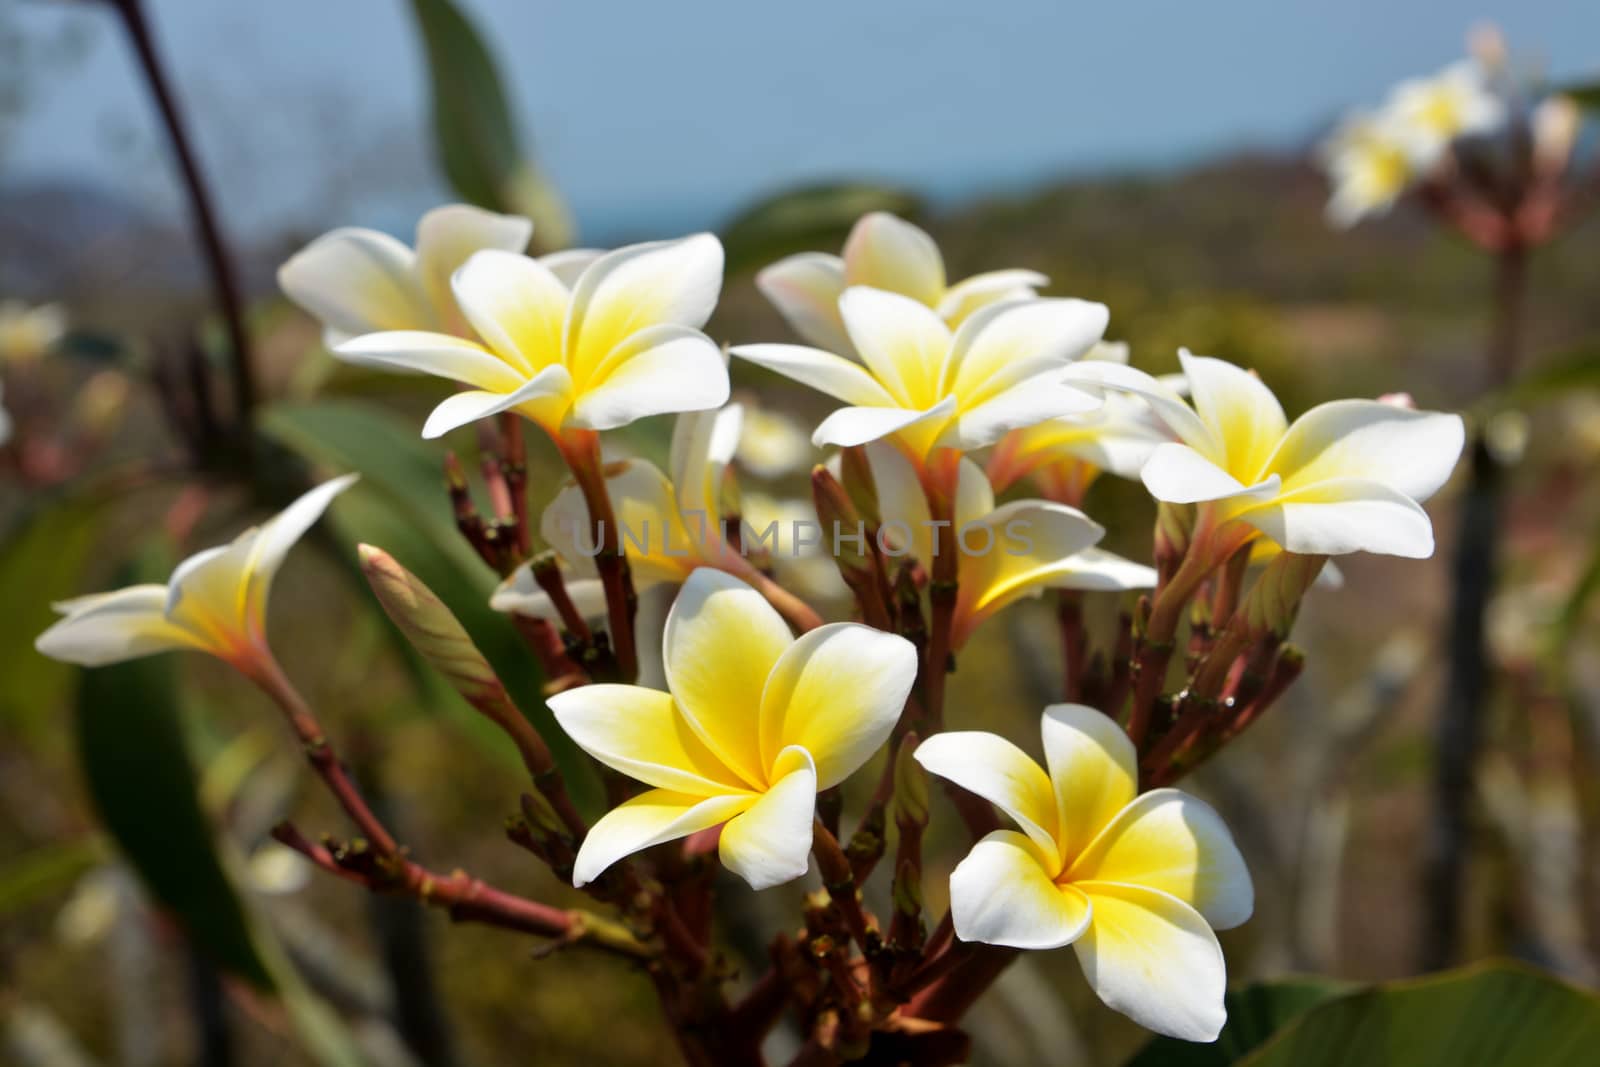 A branch with yellow frangipani flowers by ideation90